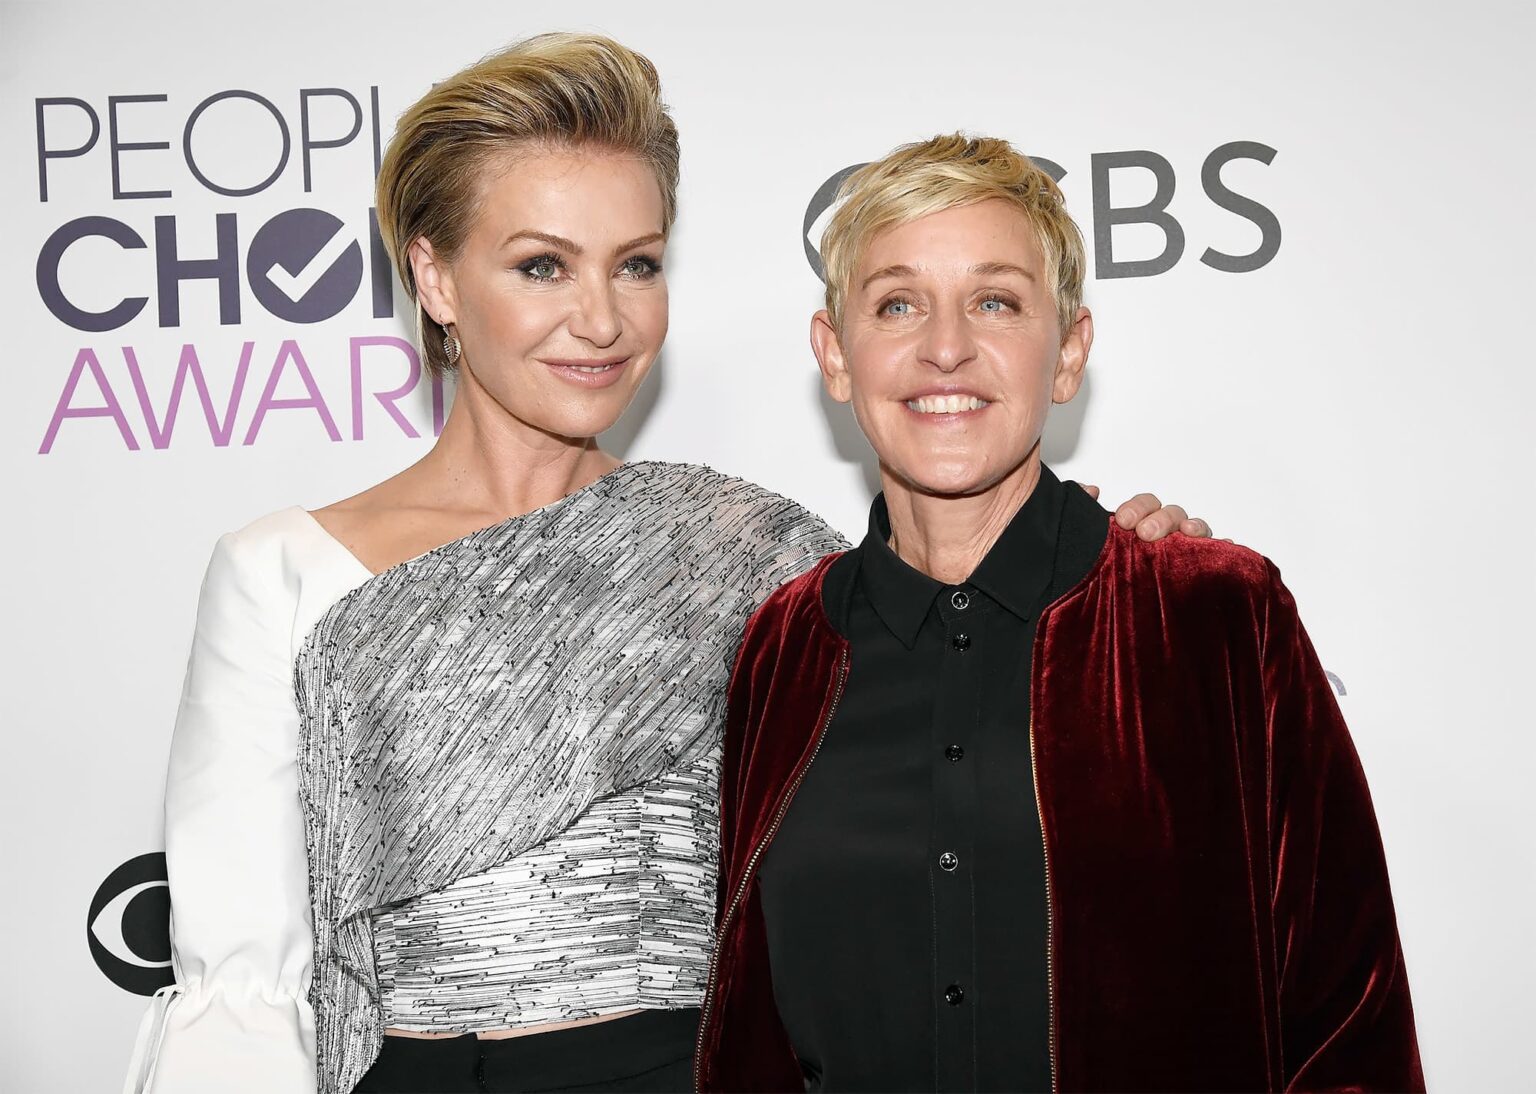 This year hasn’t been great for comedian & TV show host Ellen DeGeneres. QAnon has now got involved and here are the juicy details.